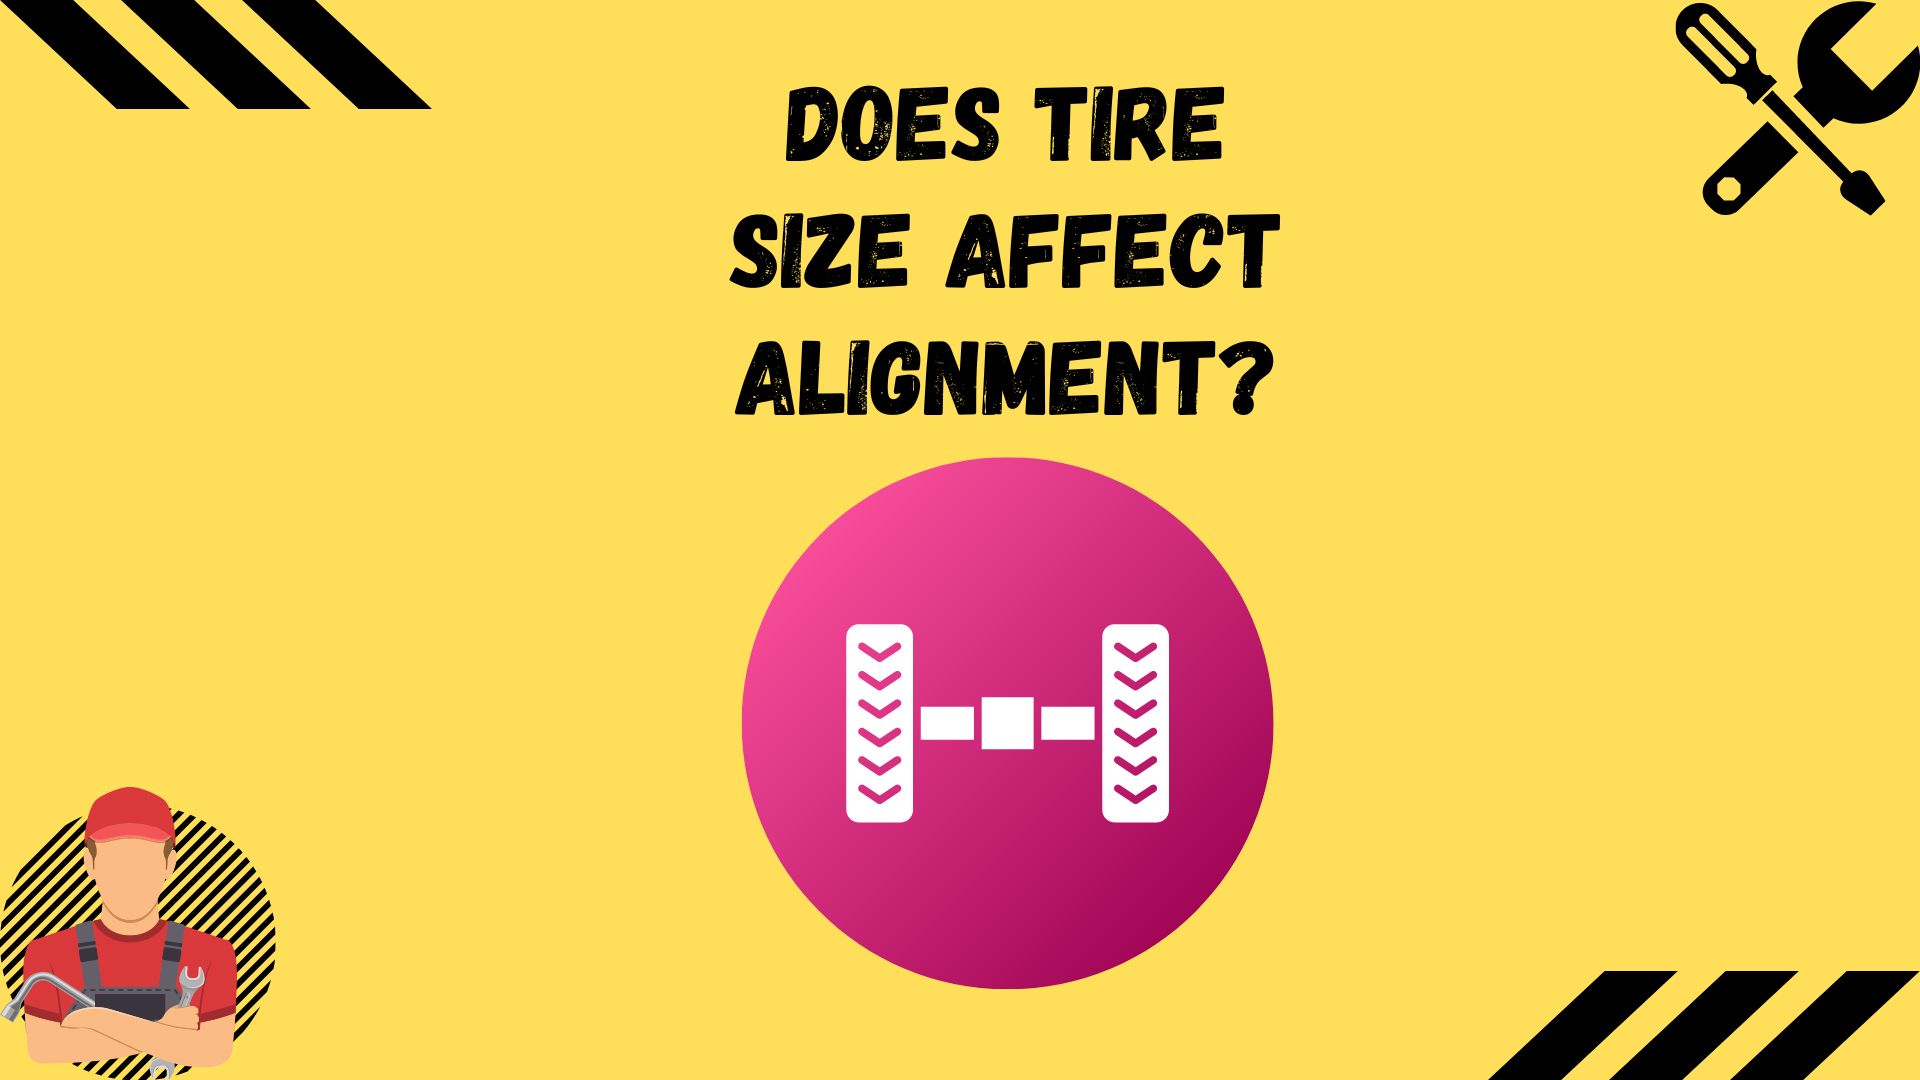 Does Tire Size Affect Alignment